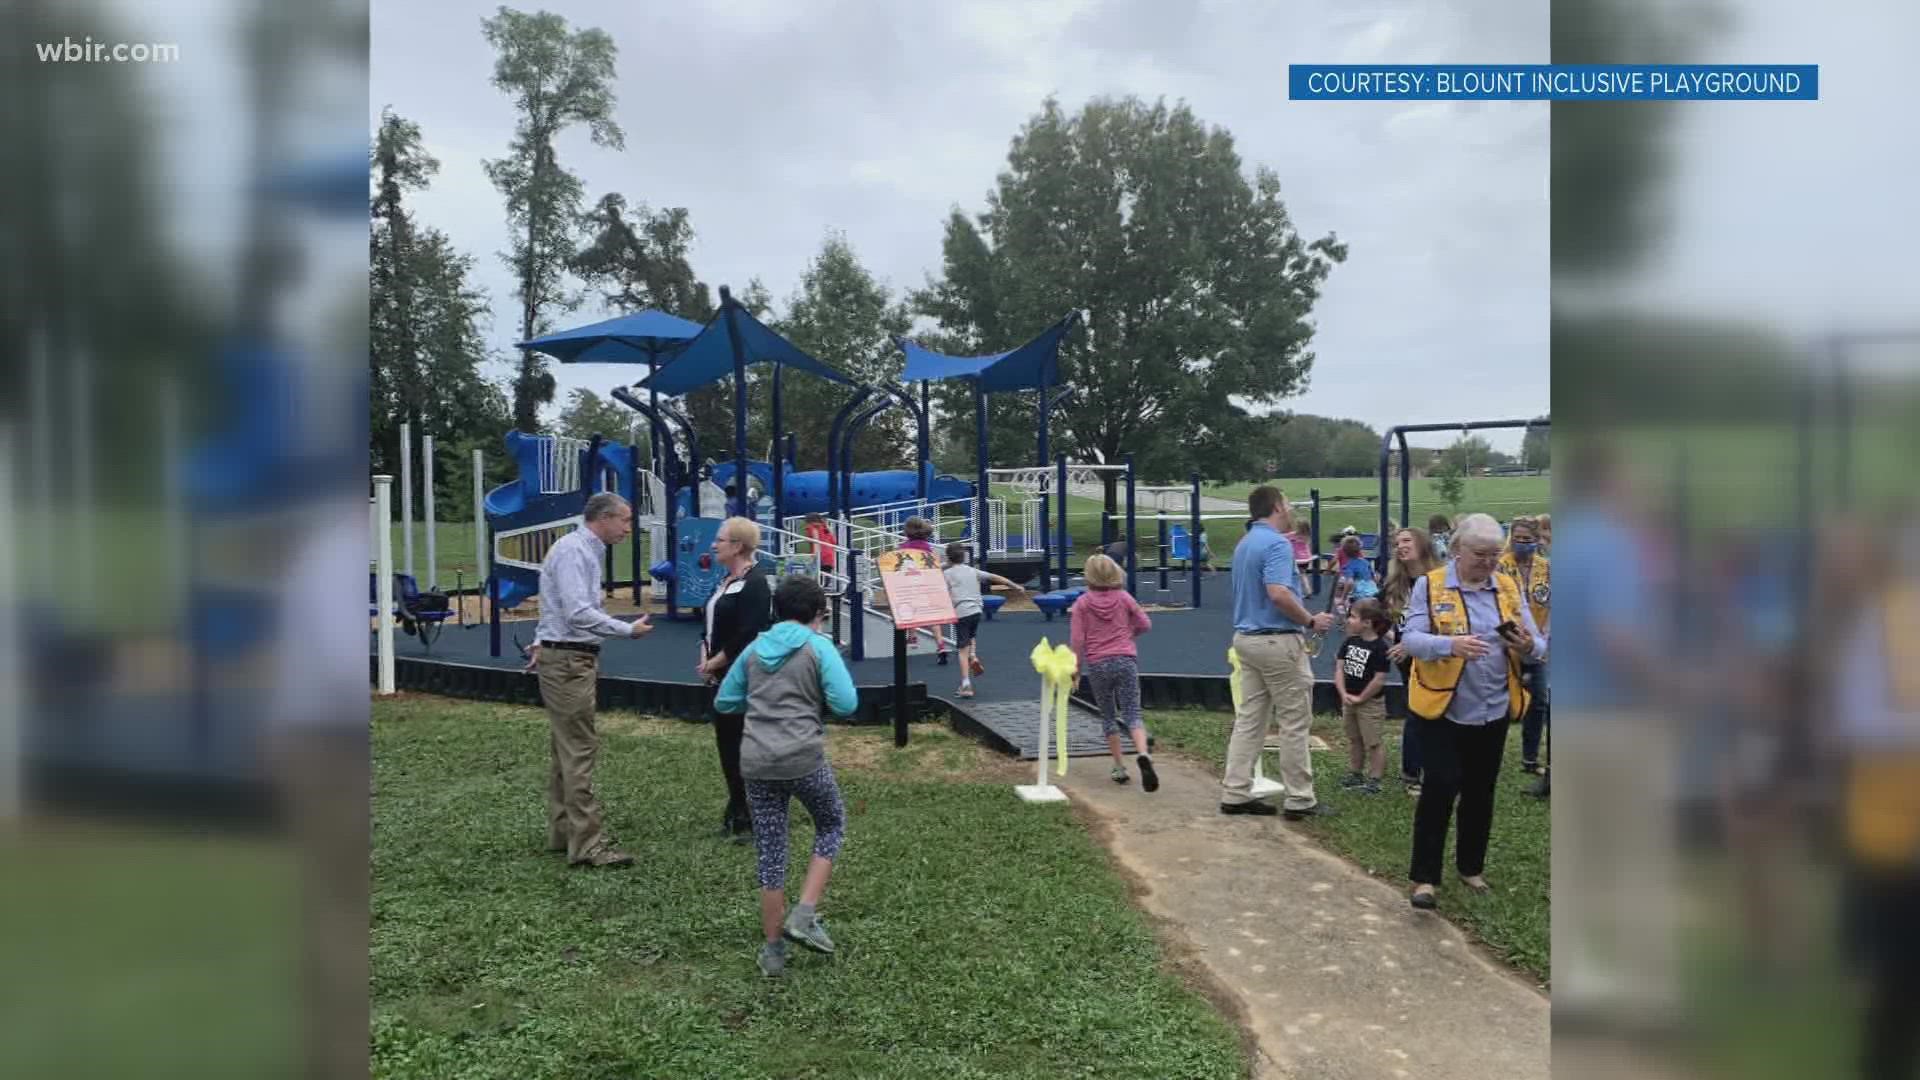 The Blount Inclusive Playground in John Sevier Park opened Wednesday. Organizers say it will serve  children with disabilities and their families.